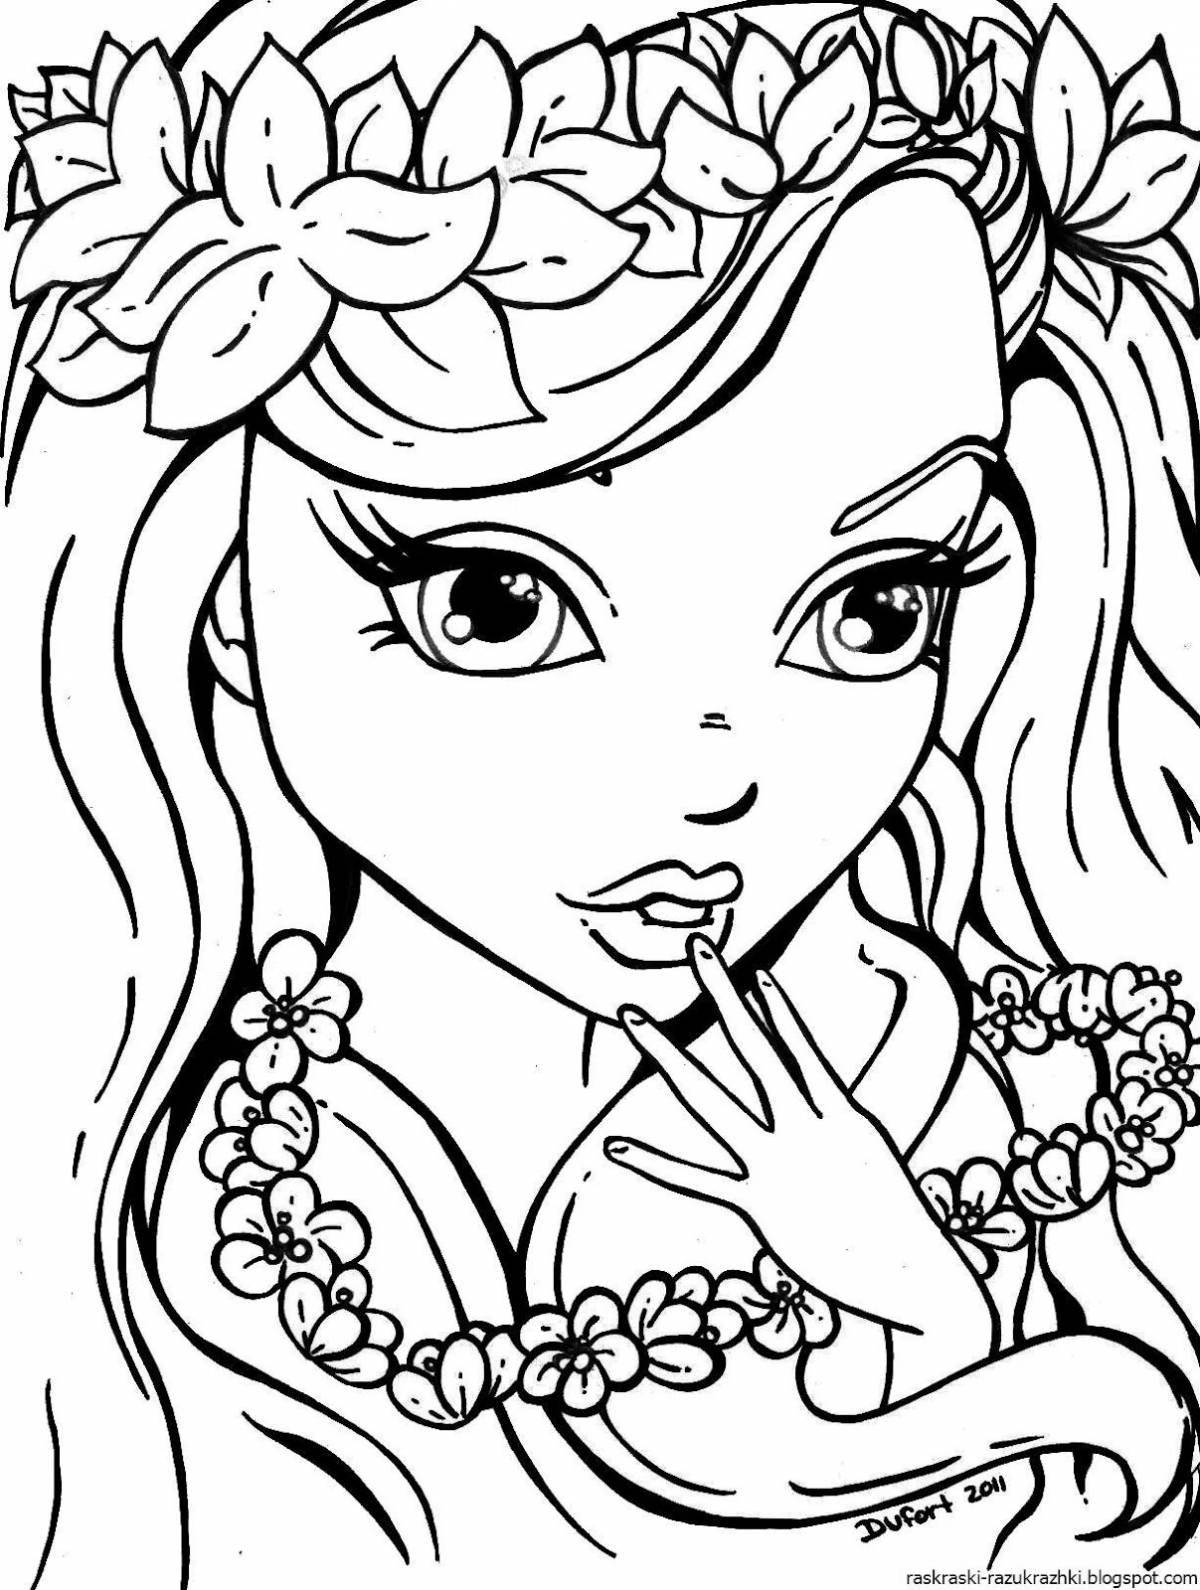 Adorable coloring book is ready